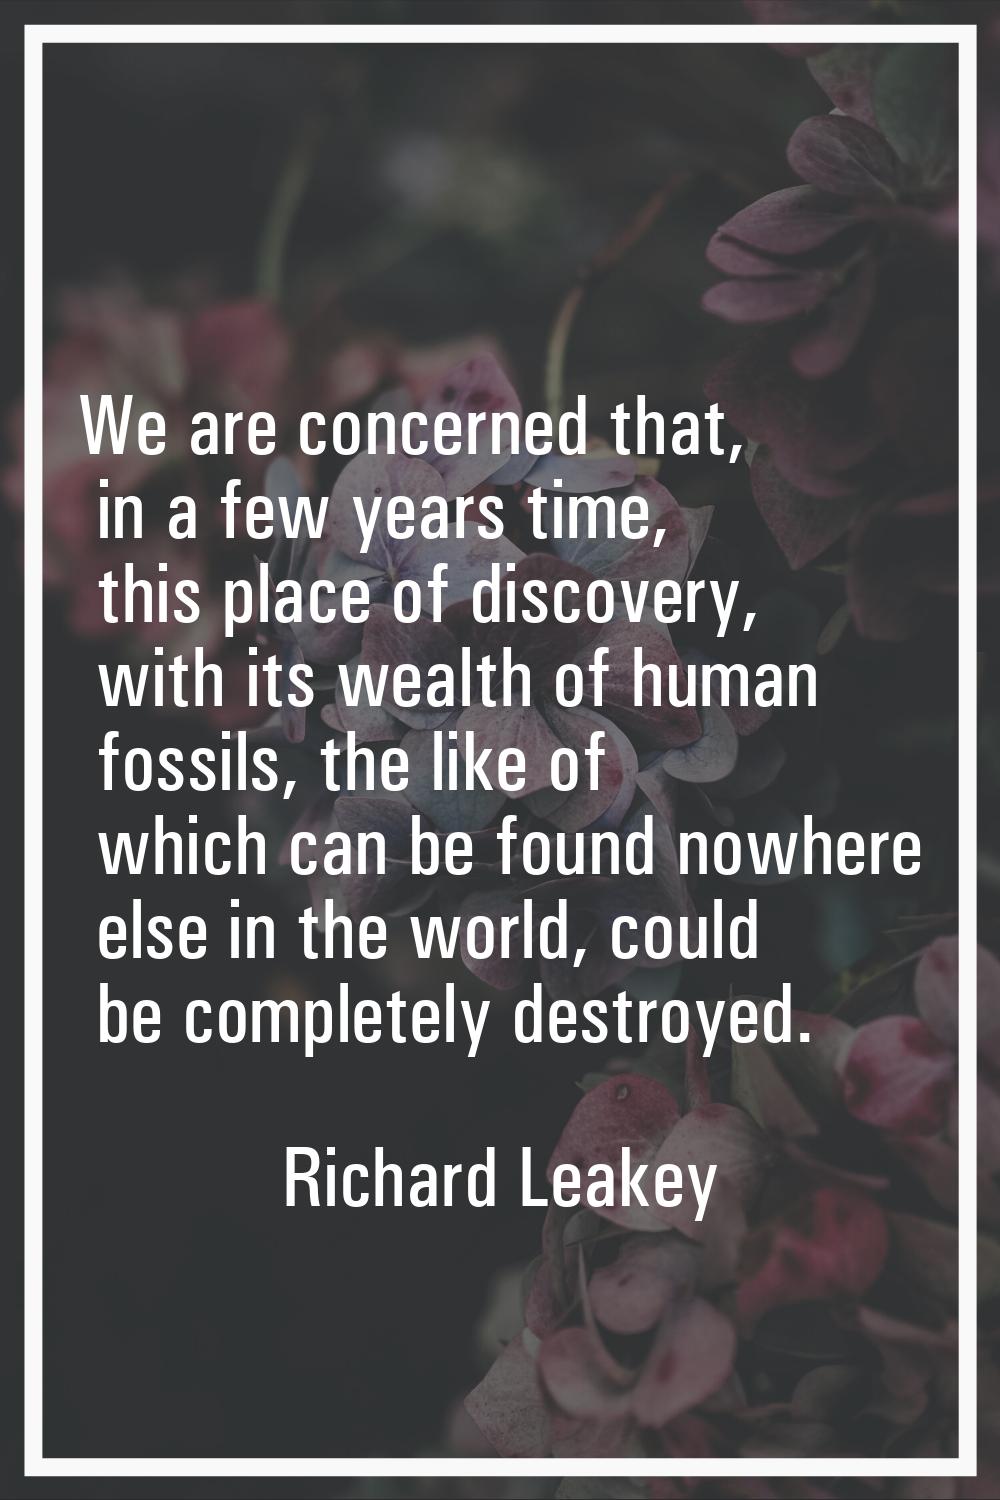 We are concerned that, in a few years time, this place of discovery, with its wealth of human fossi